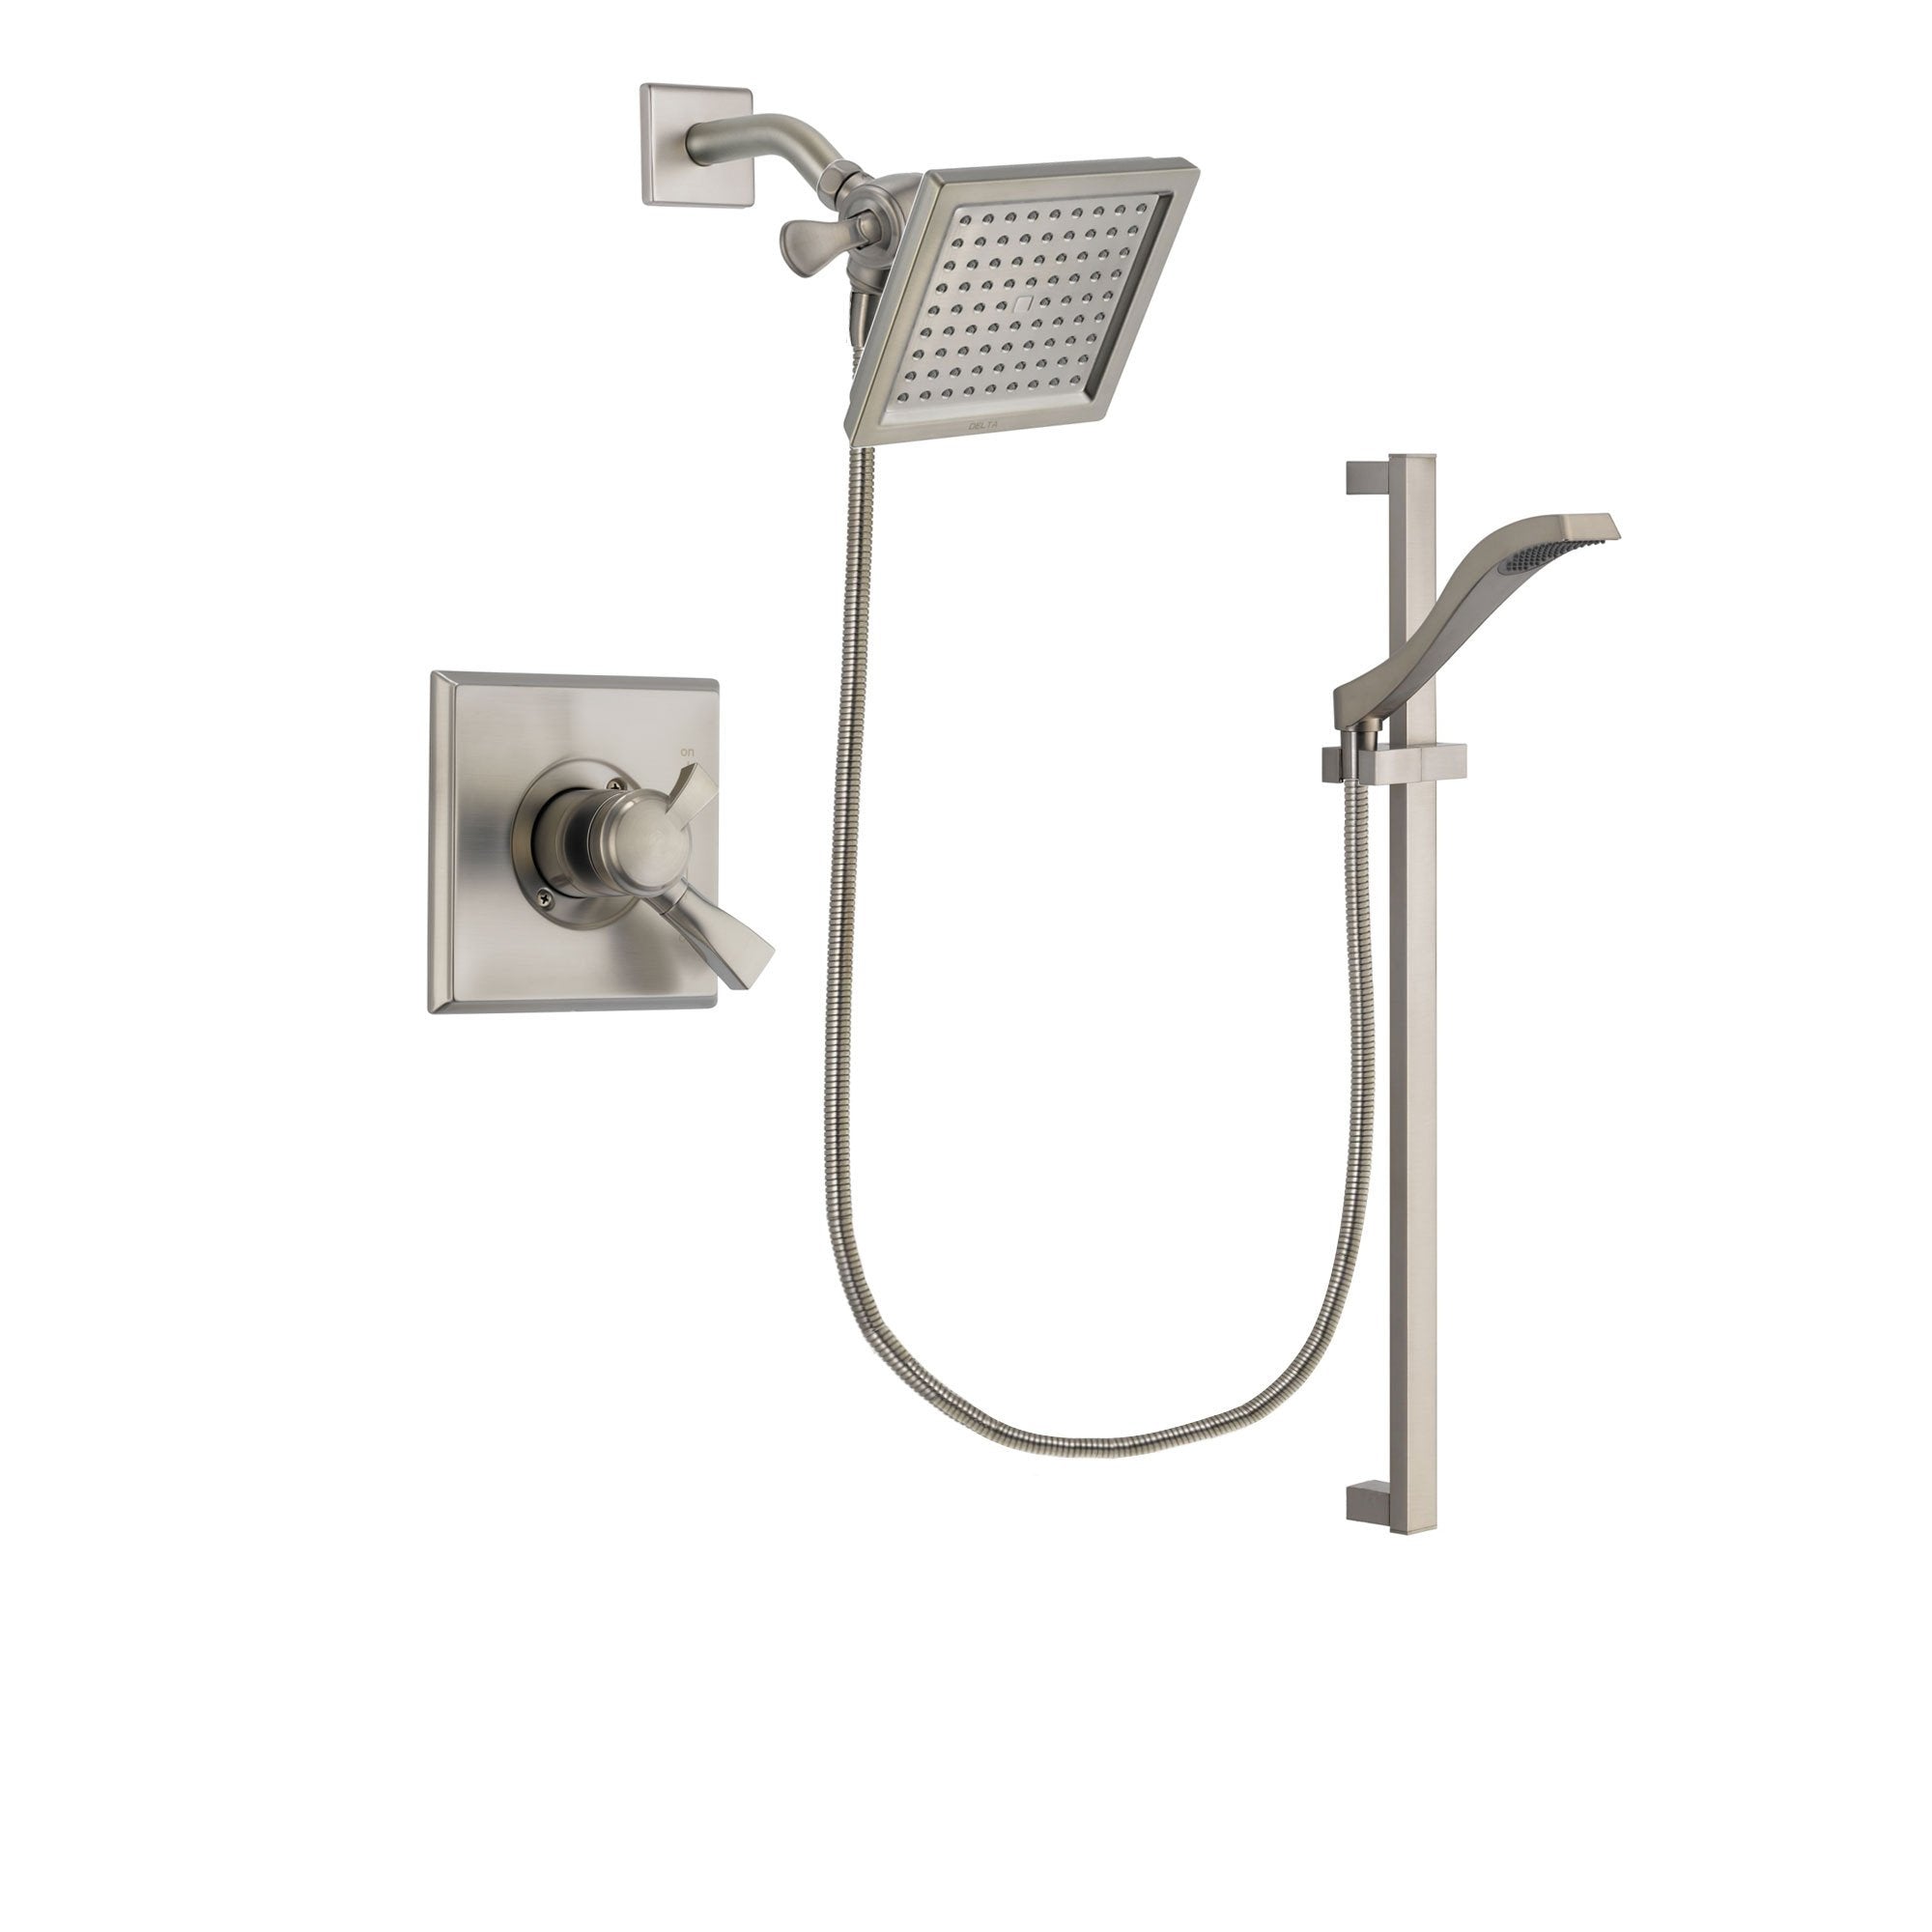 Delta Dryden Stainless Steel Finish Shower Faucet System w/ Hand Spray DSP2250V